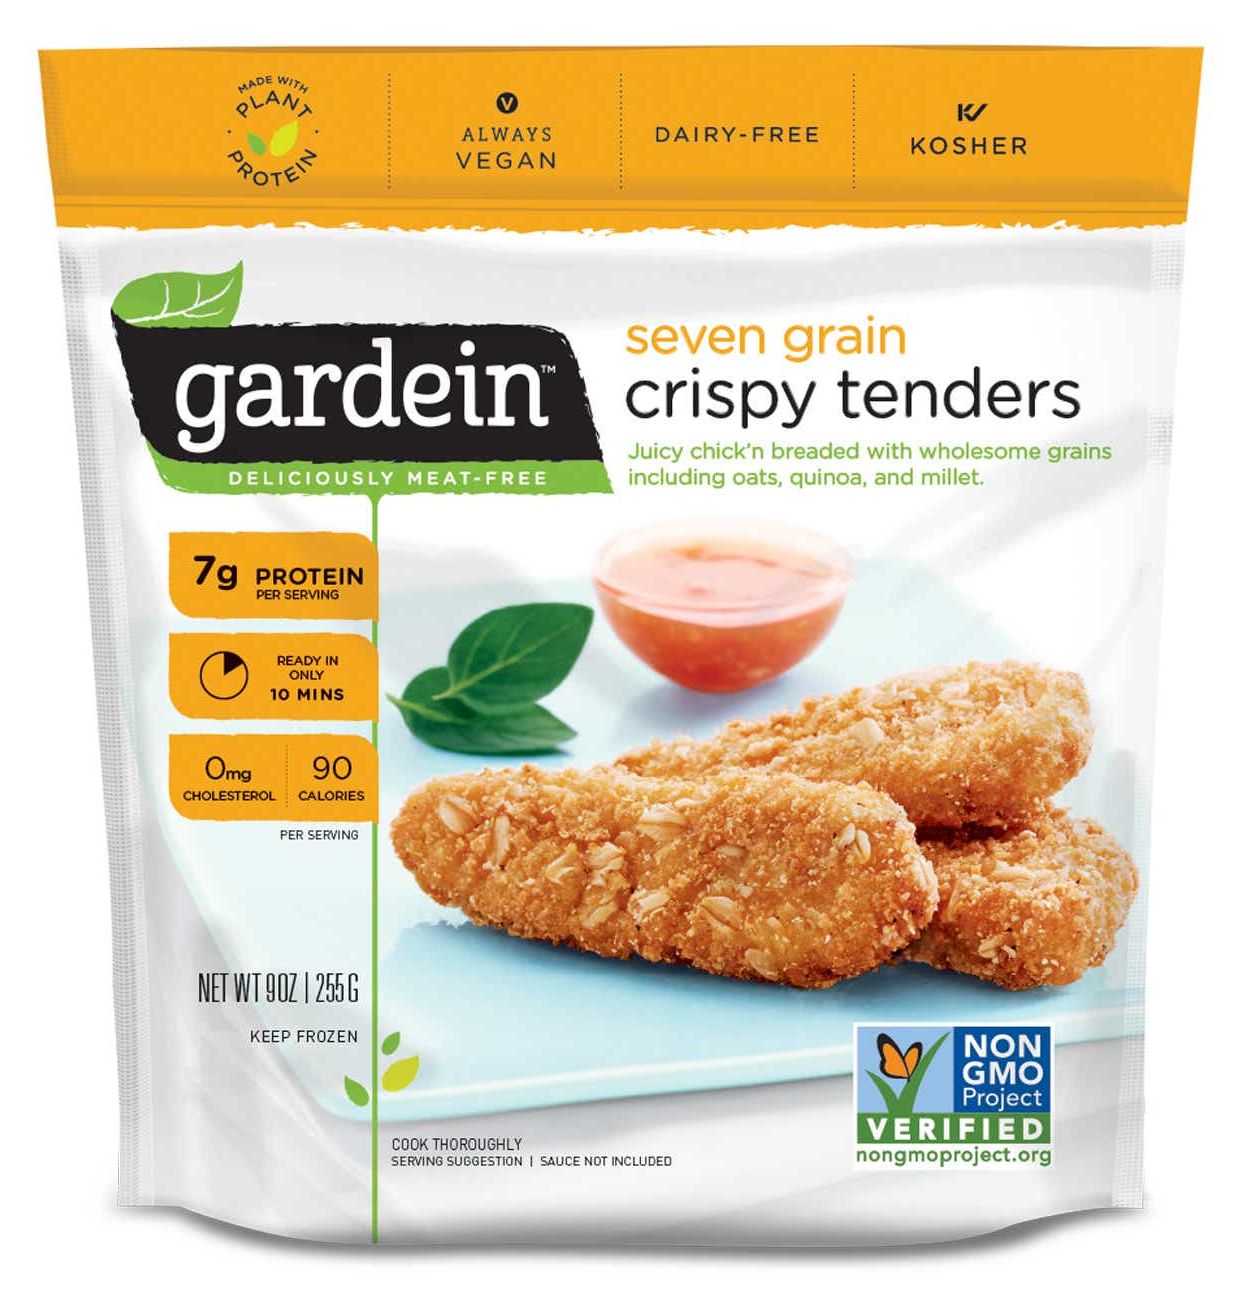 Gardein plant-based food compared